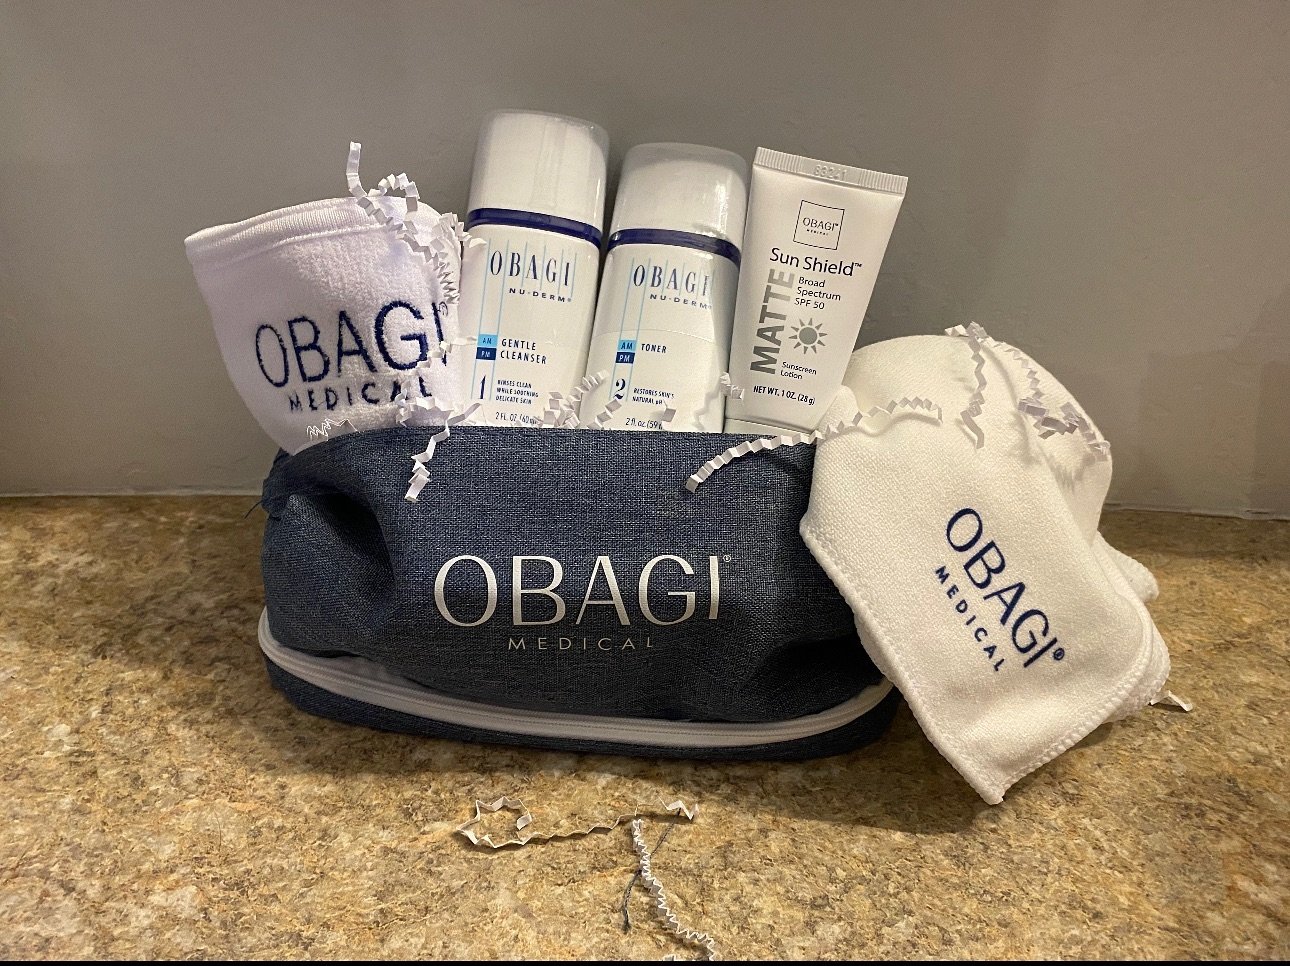 Mother&rsquo;s Day Obagi Travel Bags - the perfect gift for mom - $39.99 - limited quantity, don&rsquo;t miss out!

Not only are we celebrating mom&rsquo;s this week, but teachers too a in honor of teacher appreciation week we are offering 20 % off o